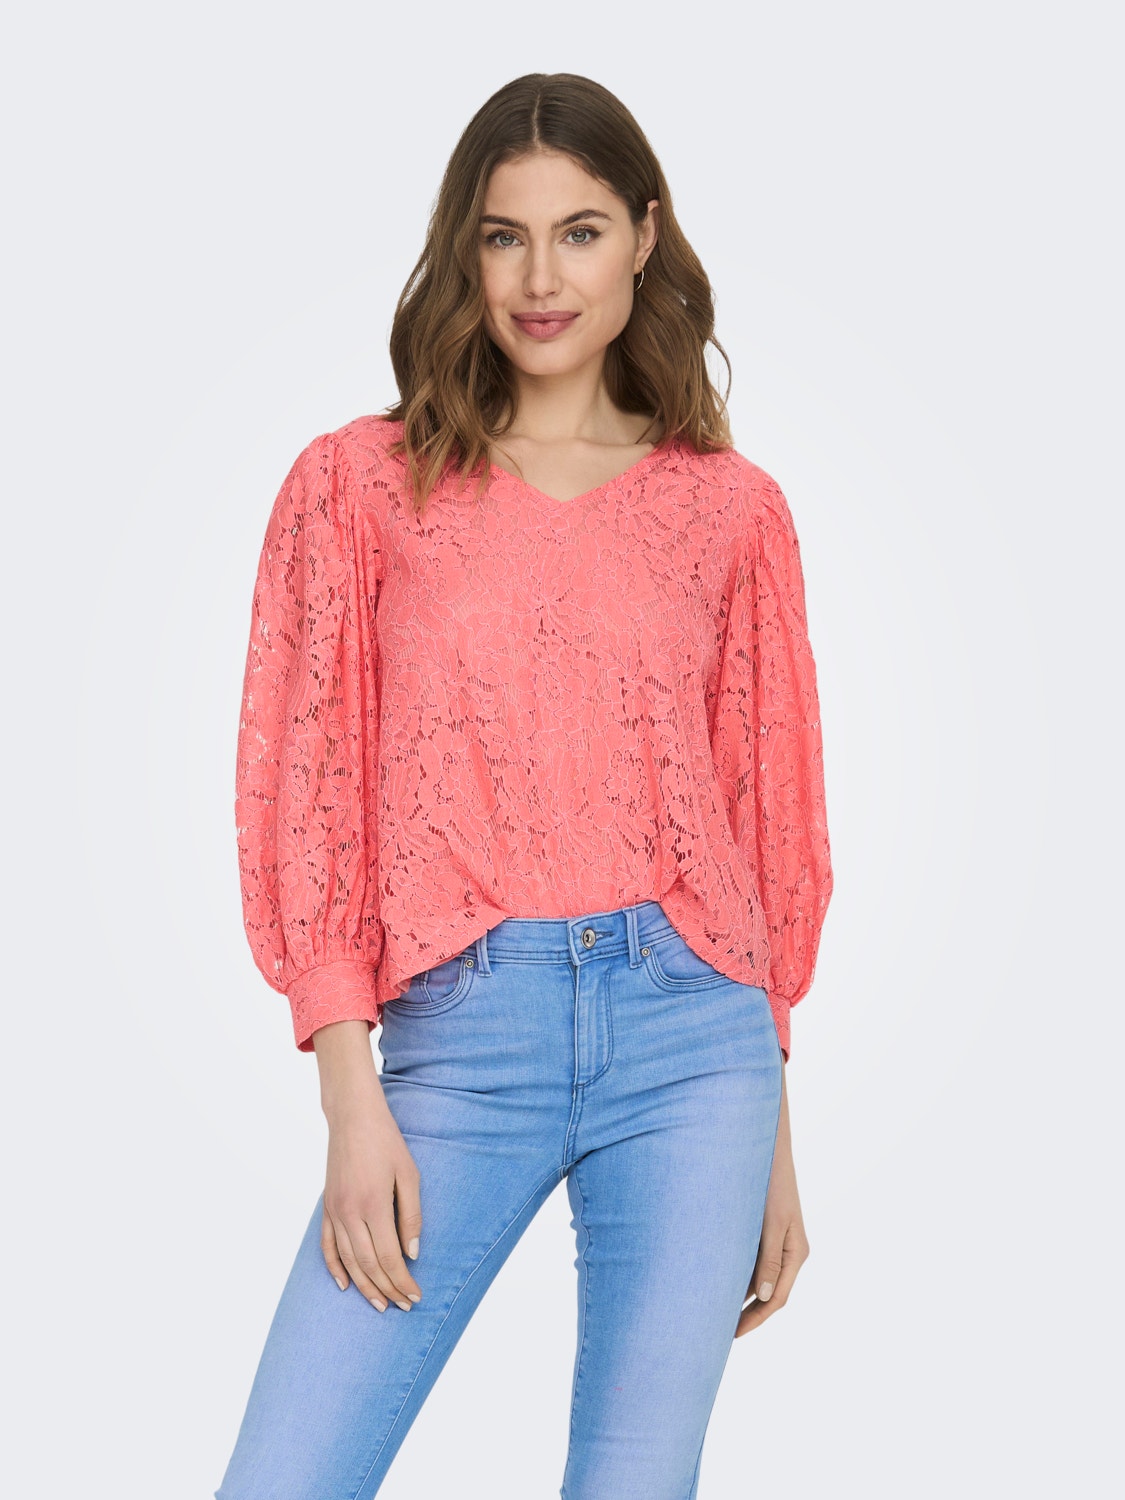 ONLY V-neck top with lace -Georgia Peach - 15284299